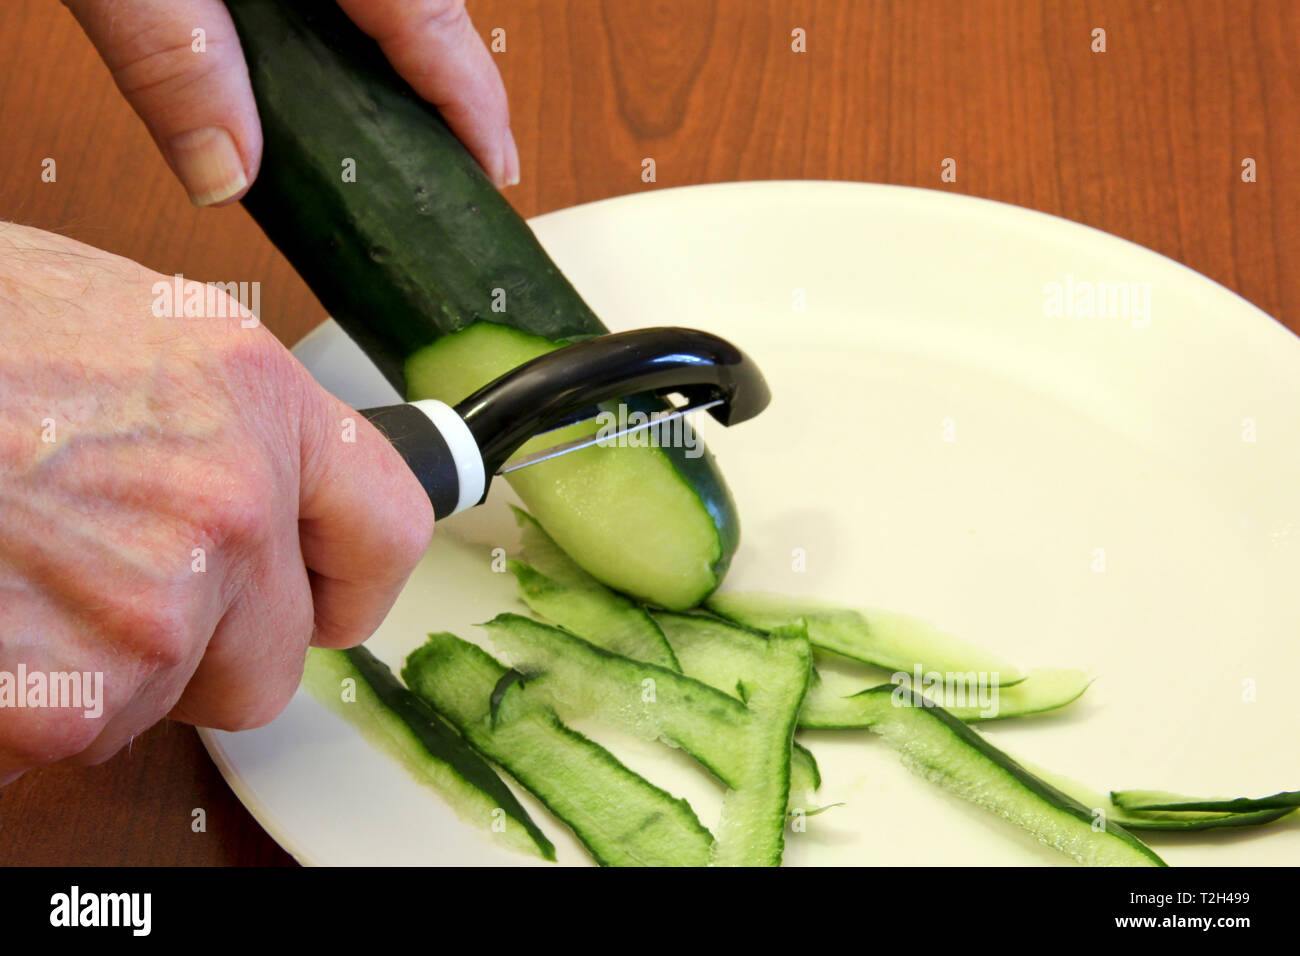 Chef peeling a Cucumber on a wooden cutting board Stock Photo